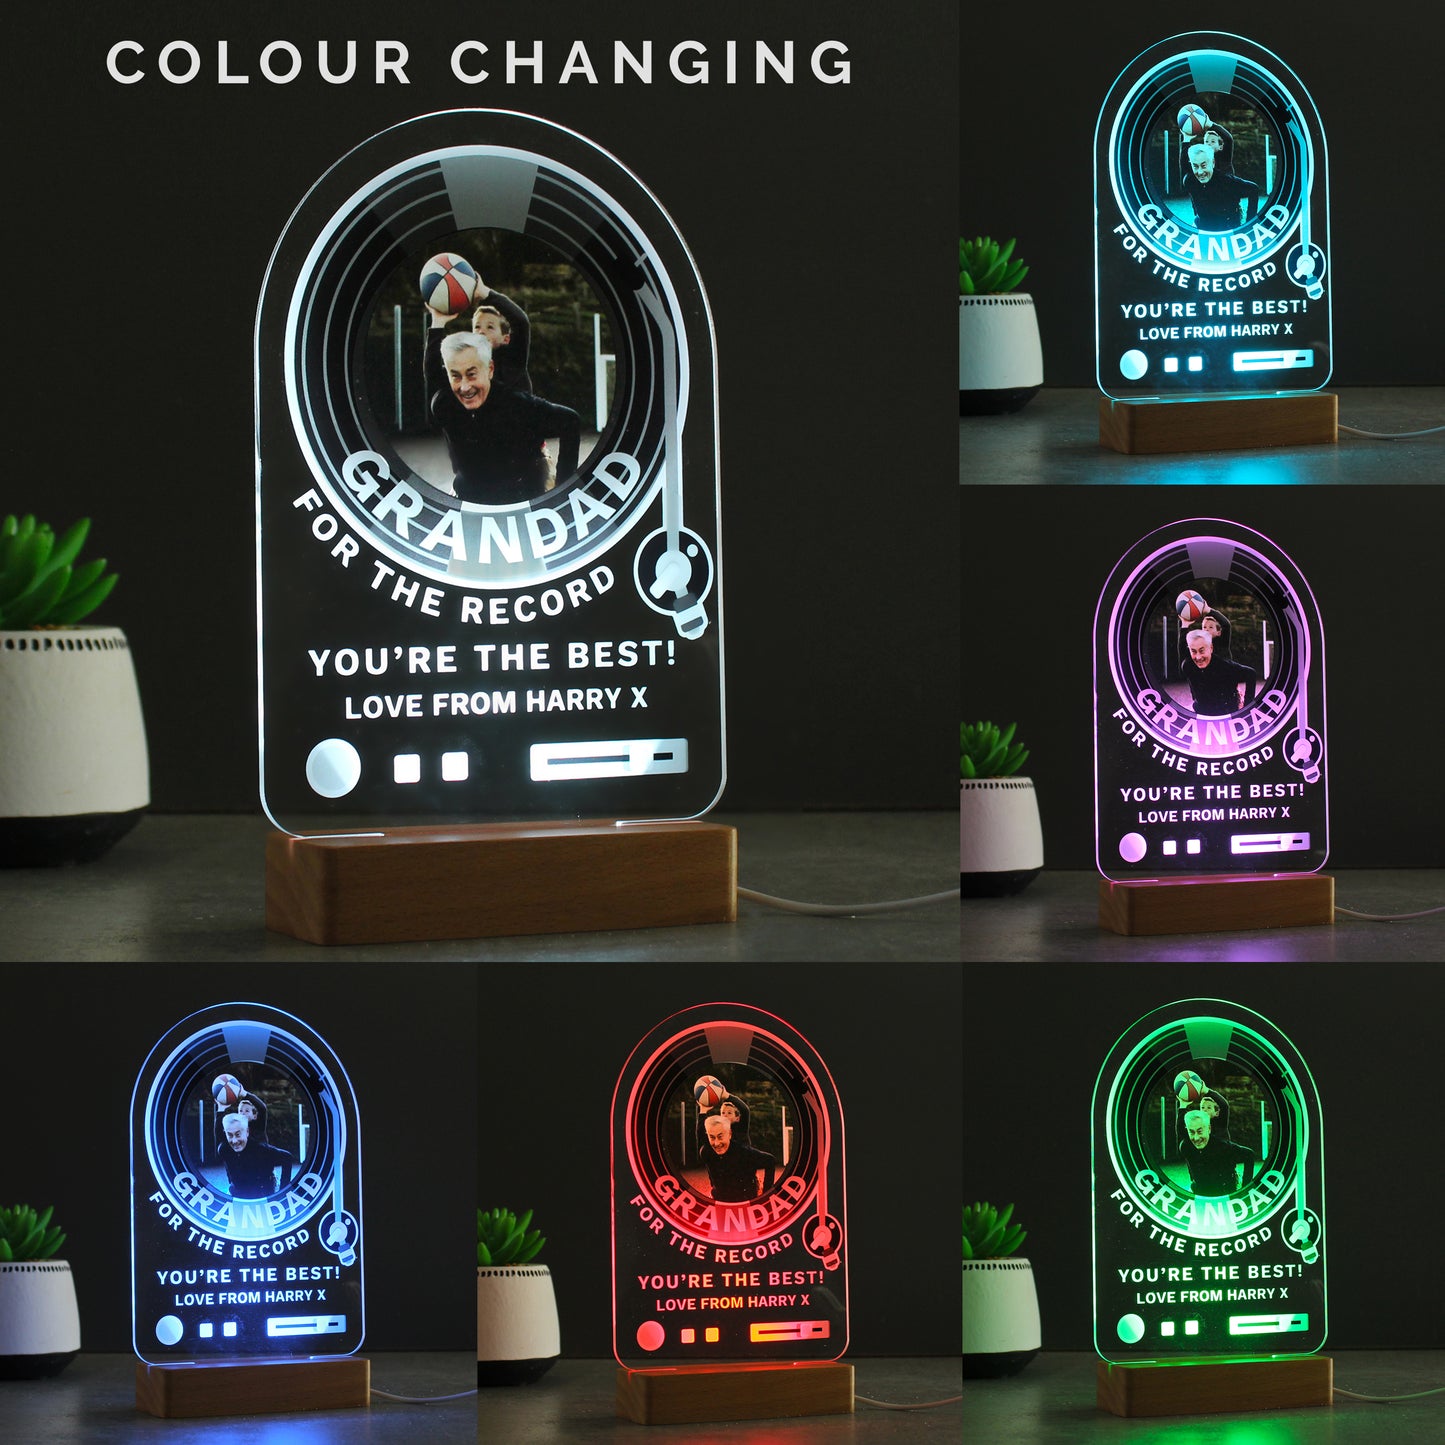 Personalised “For The Record, You’re The Best” LED Nightlight - UPLOAD YOUR OWN PHOTO! - Violet Belle Gifts - Personalised “For The Record, Your The Best” LED Nightlight - UPLOAD YOUR OWN PHOTO!